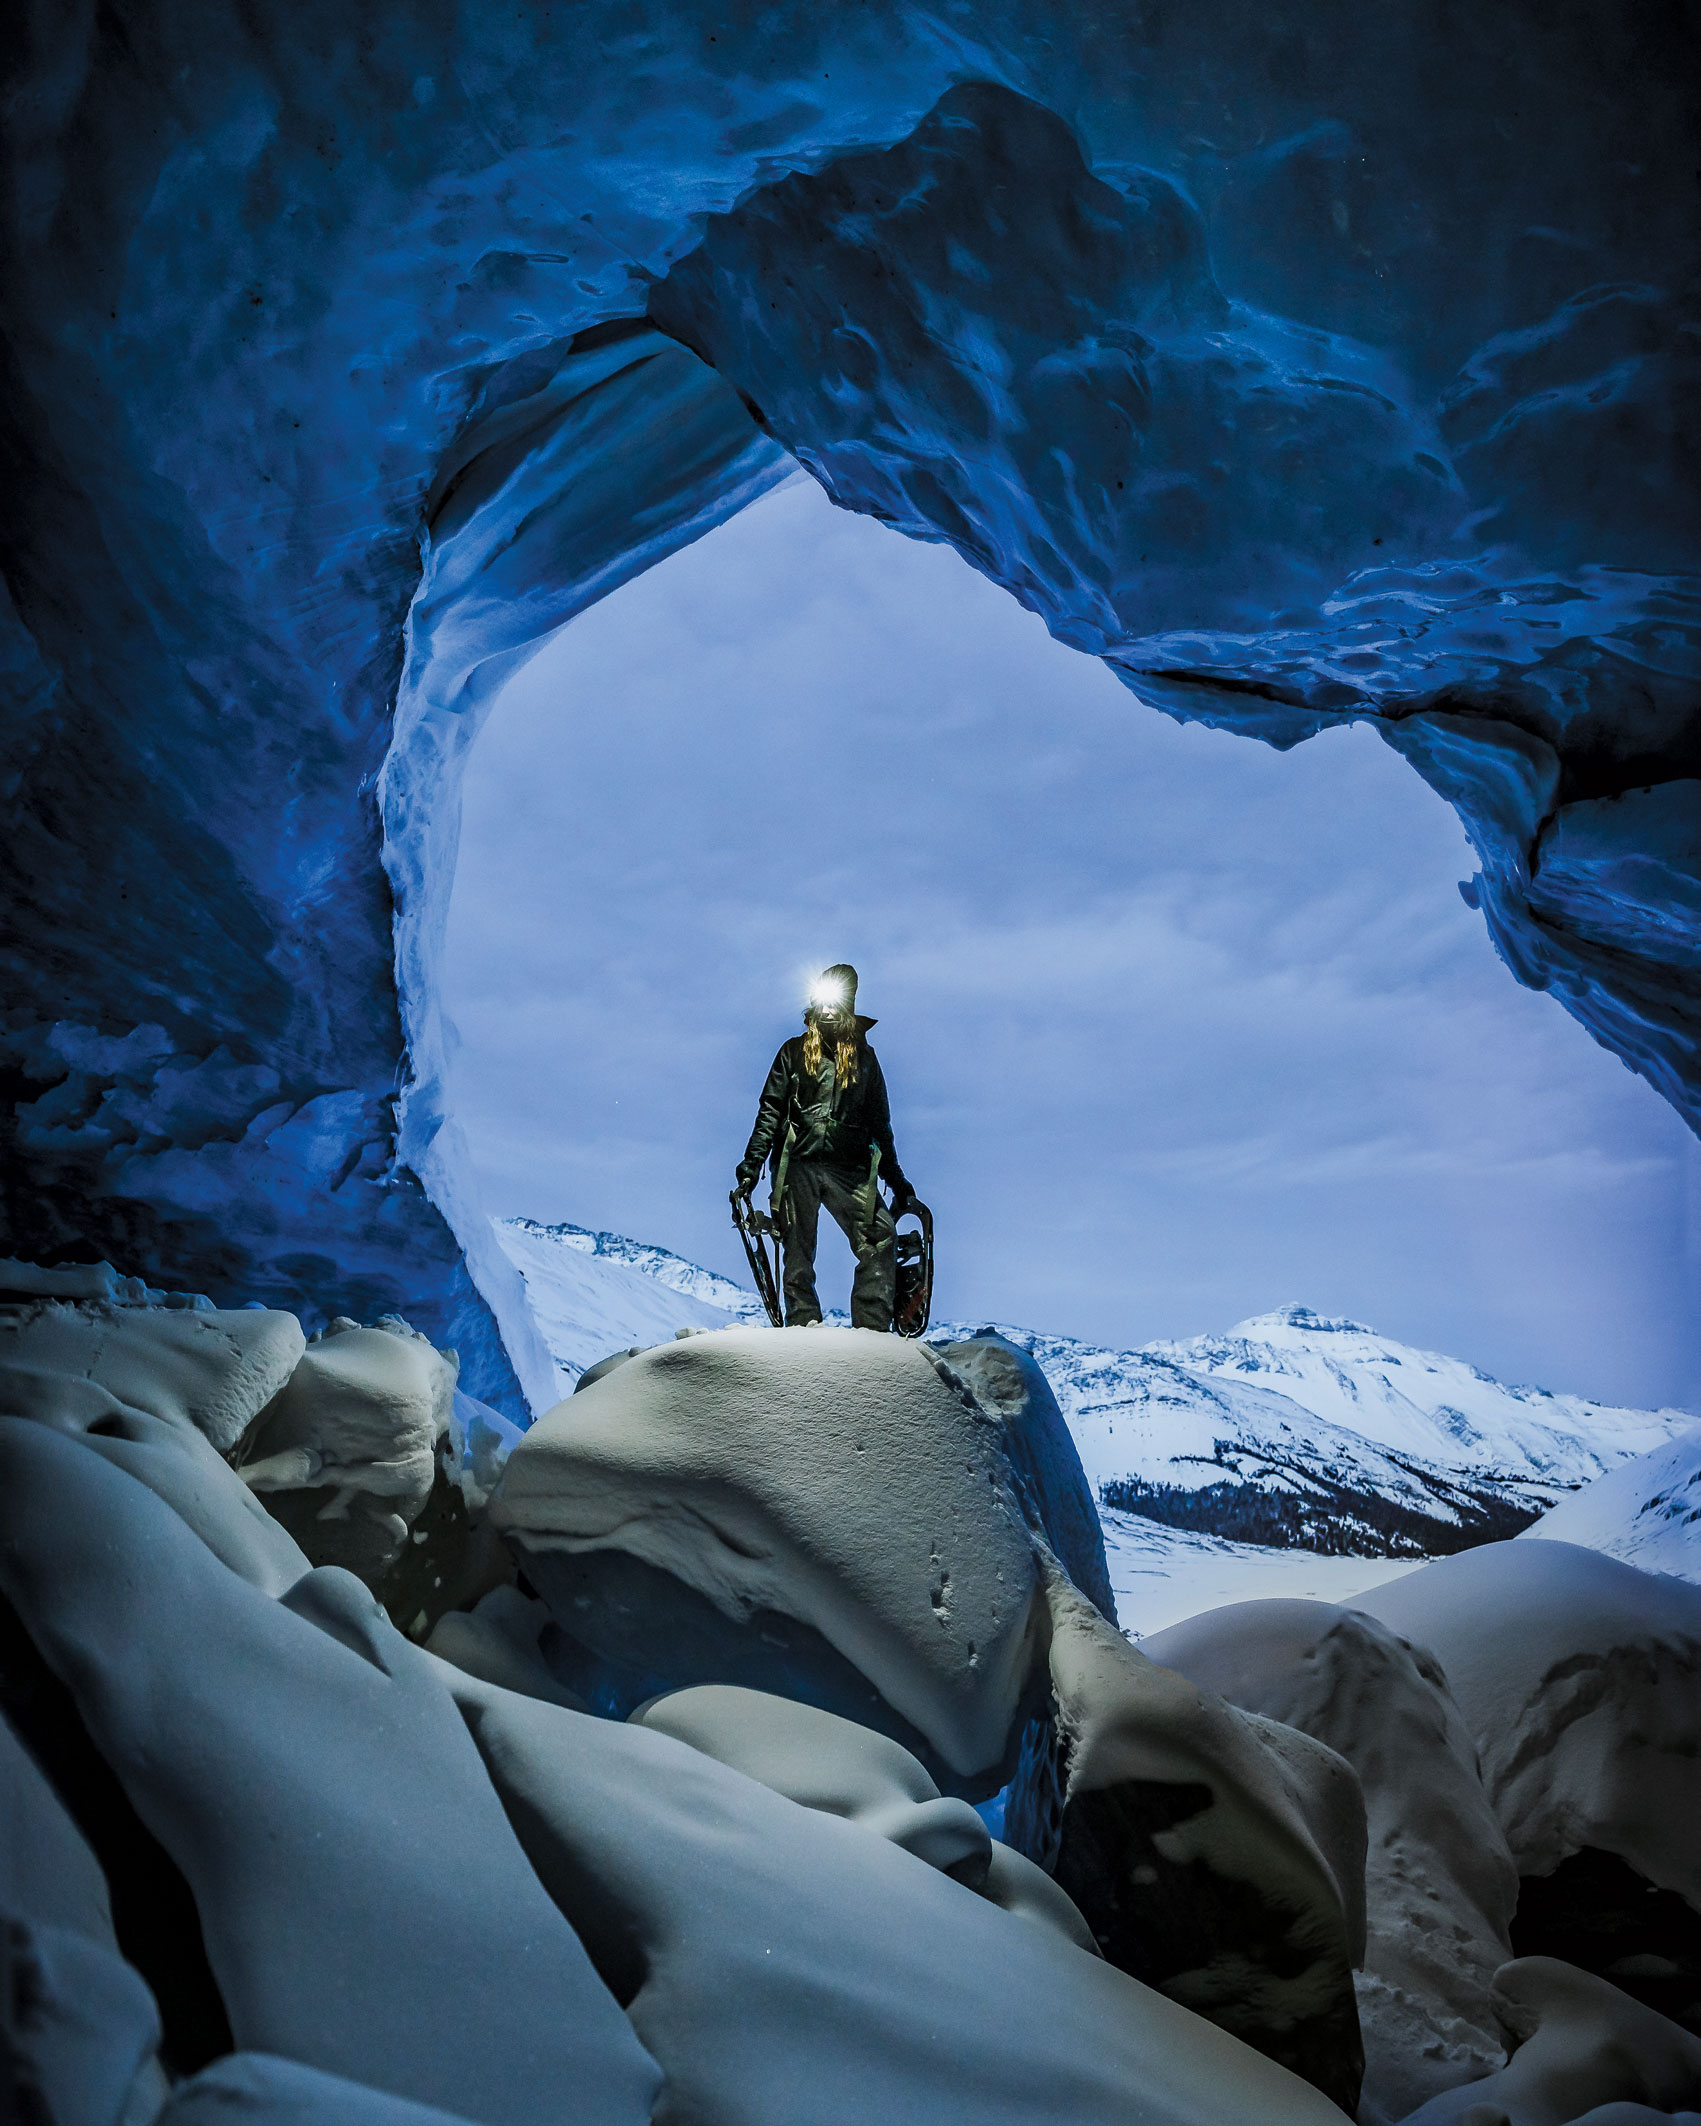 A person with snowshoes stands in an ice cave in the magical world of snow and ice